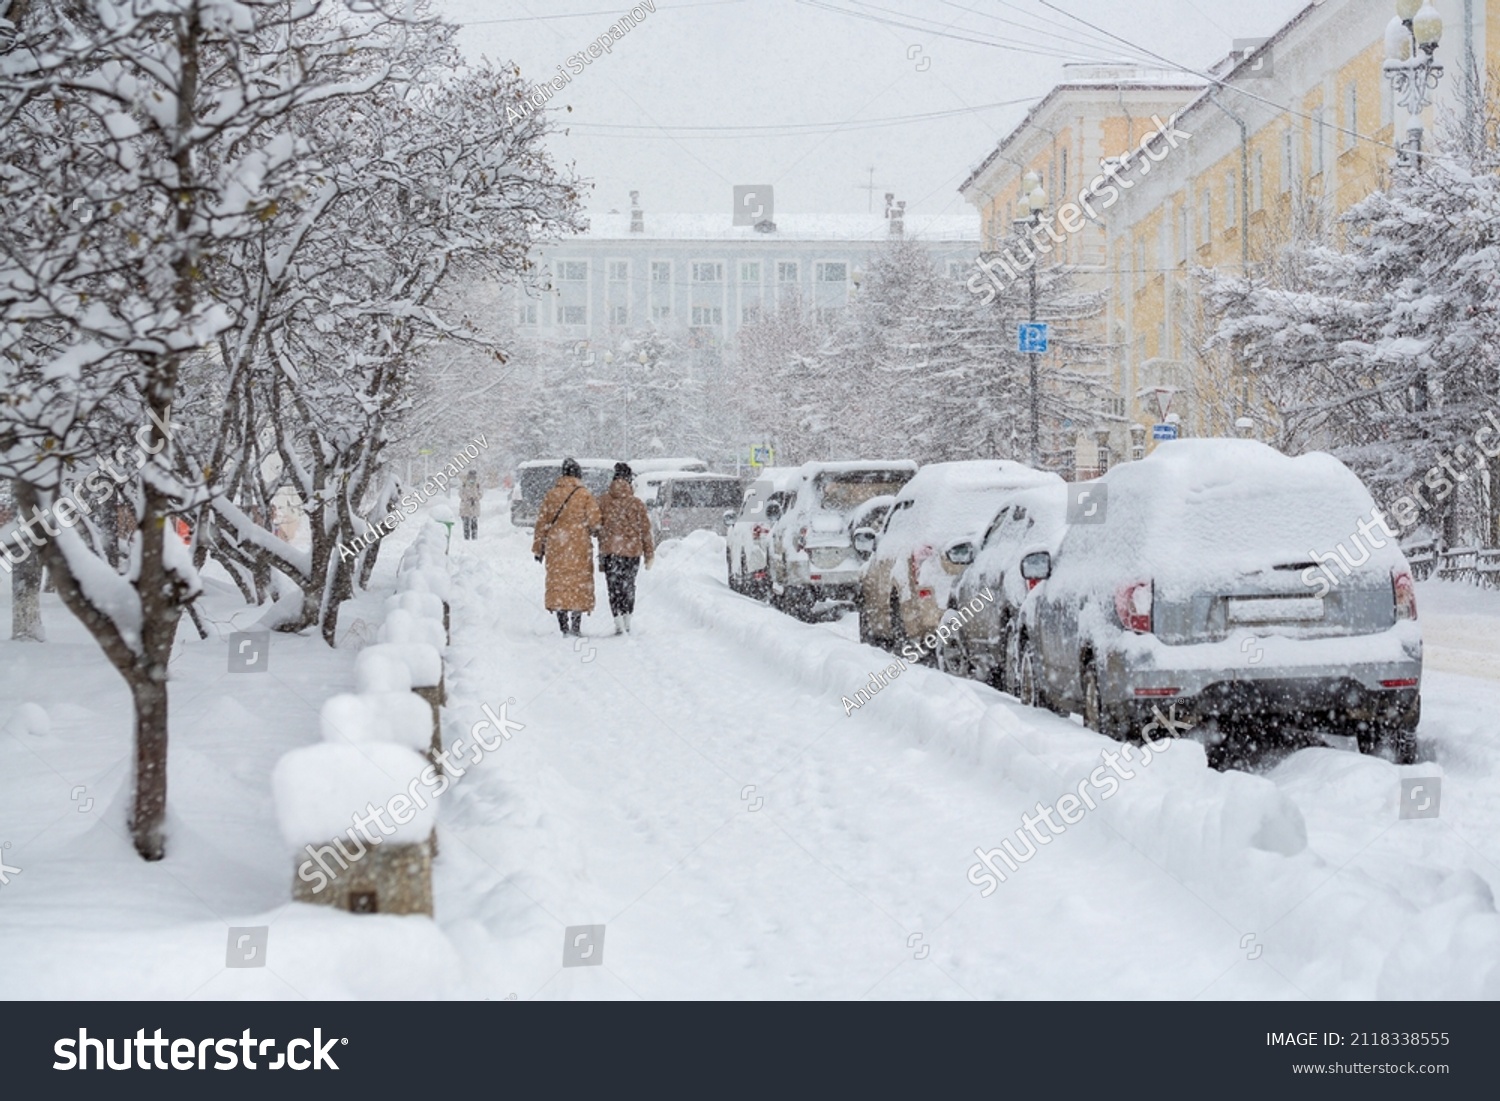 Snow covered city street during a heavy snowfall. Lots of snow on the sidewalk, cars and tree branches. Women walk around the winter city. Cold snowy weather. Magadan, Siberia, Russian Far East. #2118338555